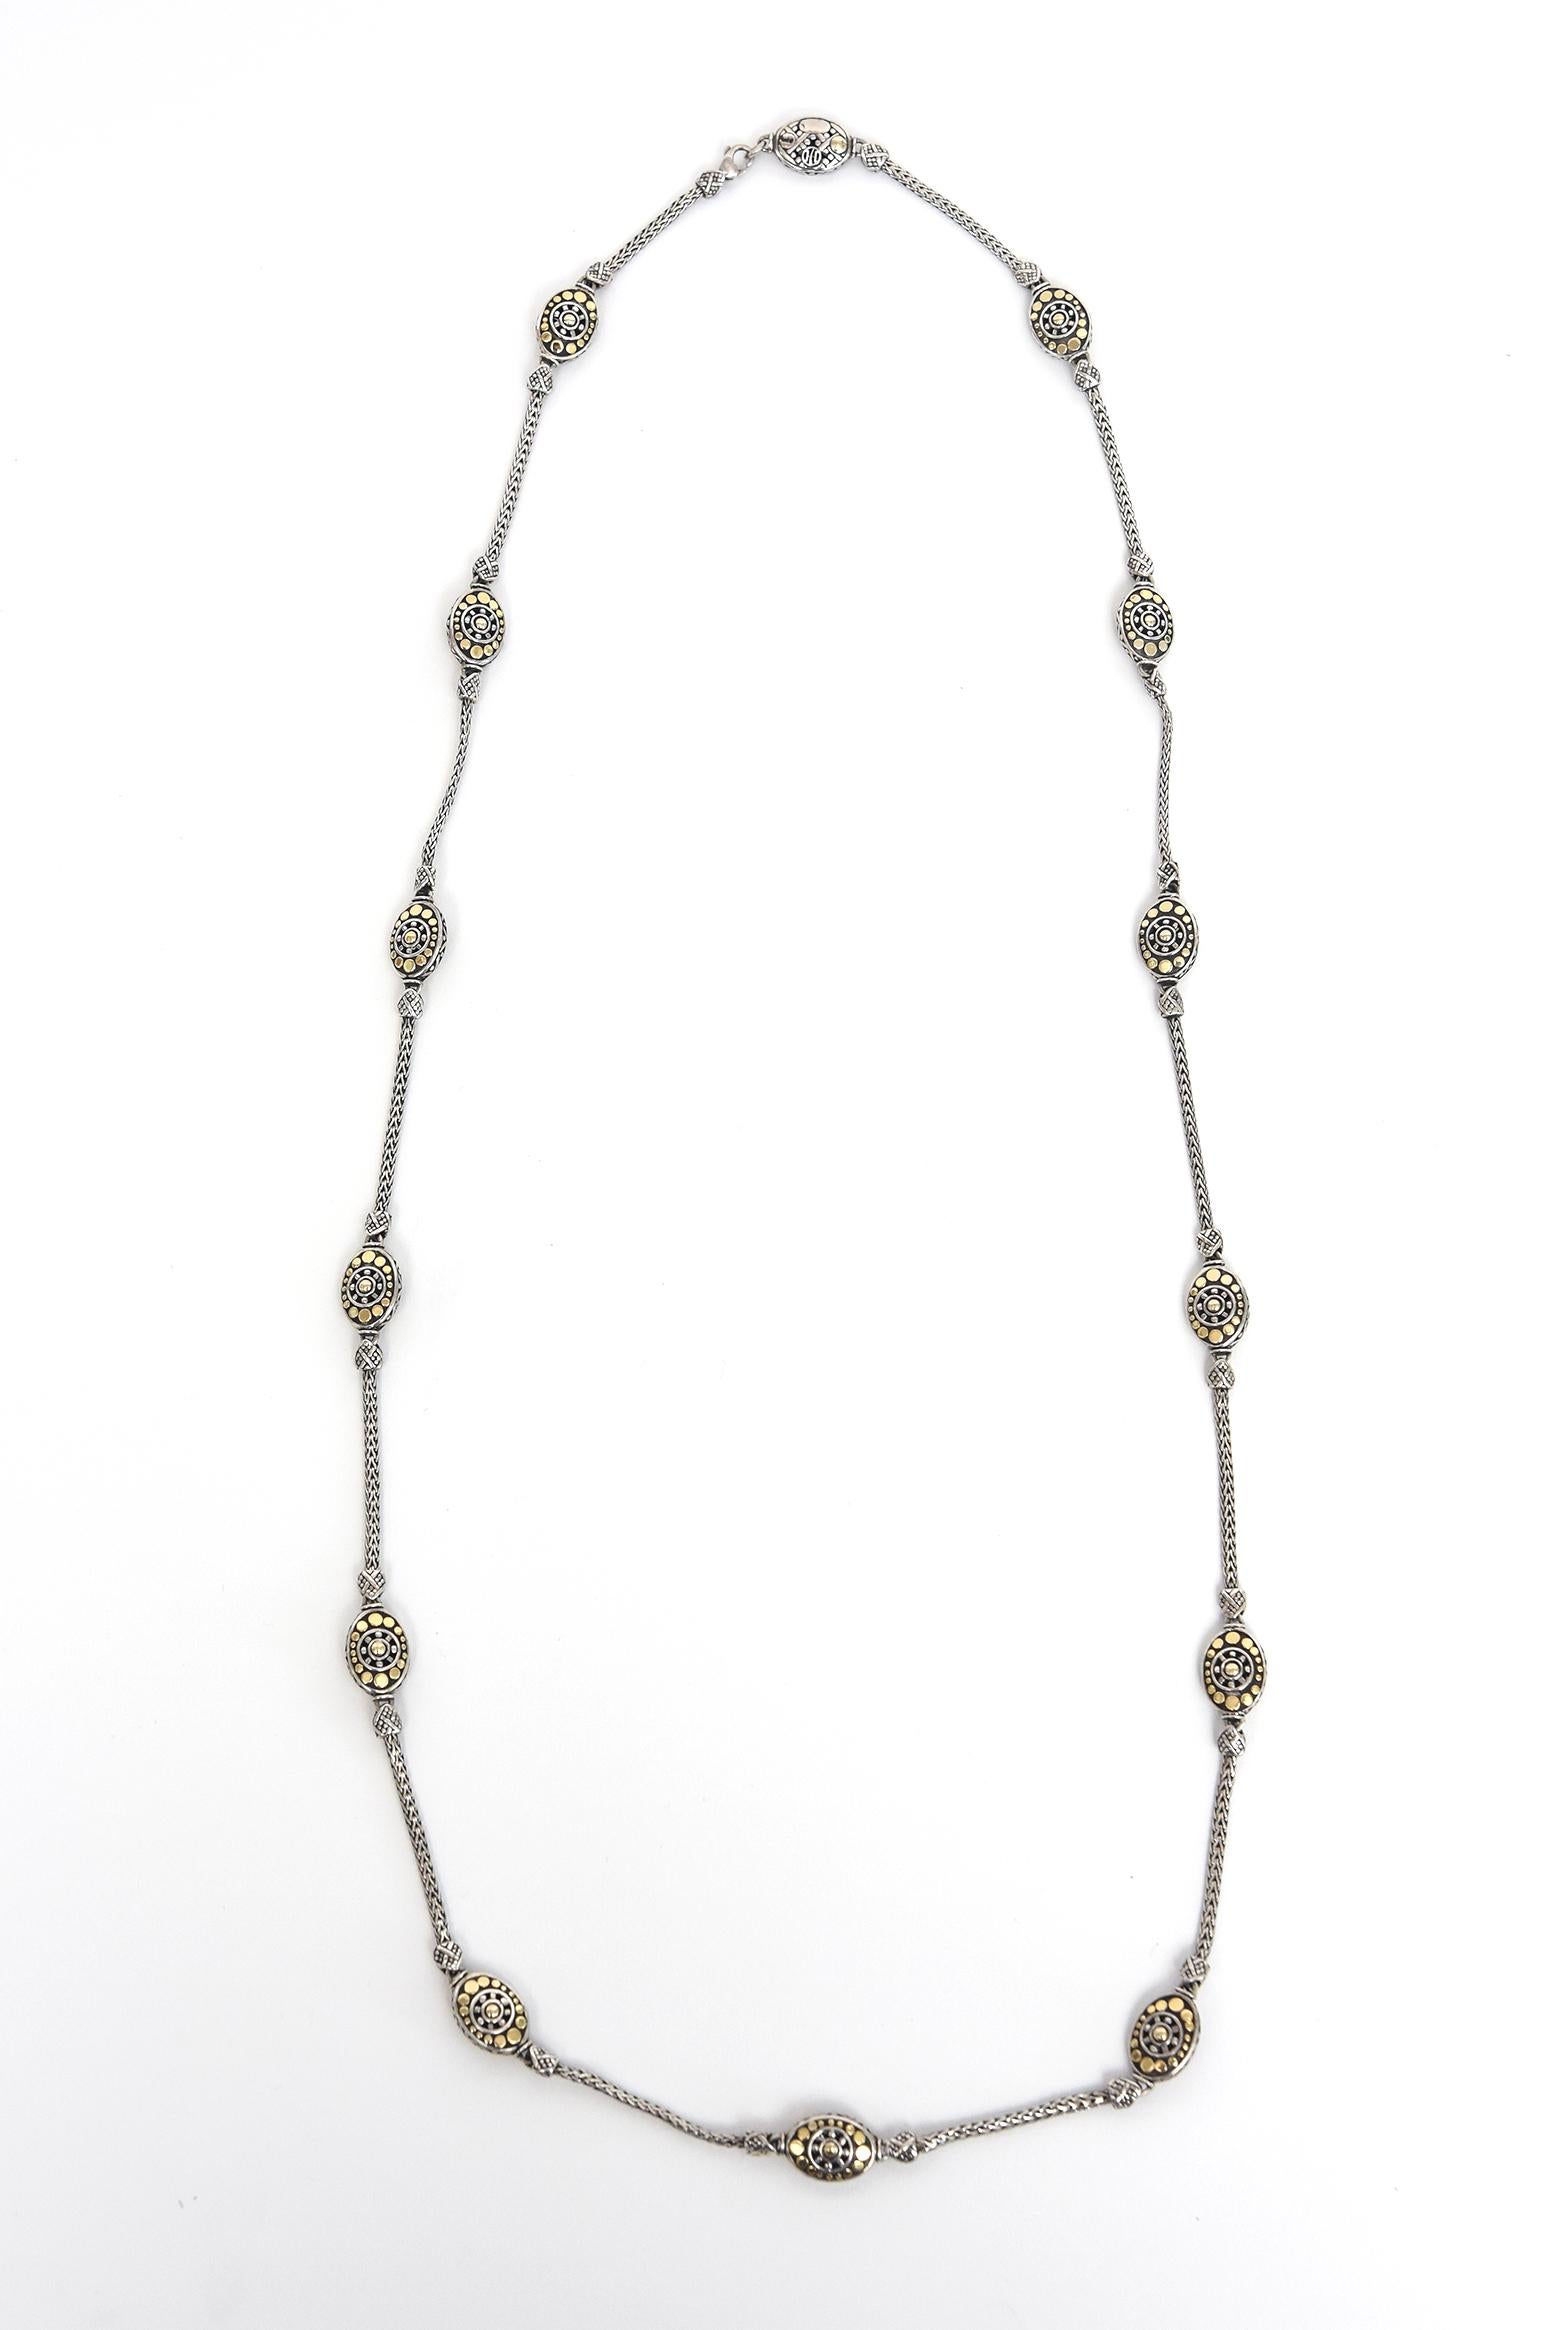 This rare extra long classic John Hardy Jaisalmer Dot Sautoir necklace is sterling silver with fourteen 11.57mm wide x 15.3mm (just the oval area) oval stations embellished with 18 karat yellow gold dots.  The sections are connected to each other by